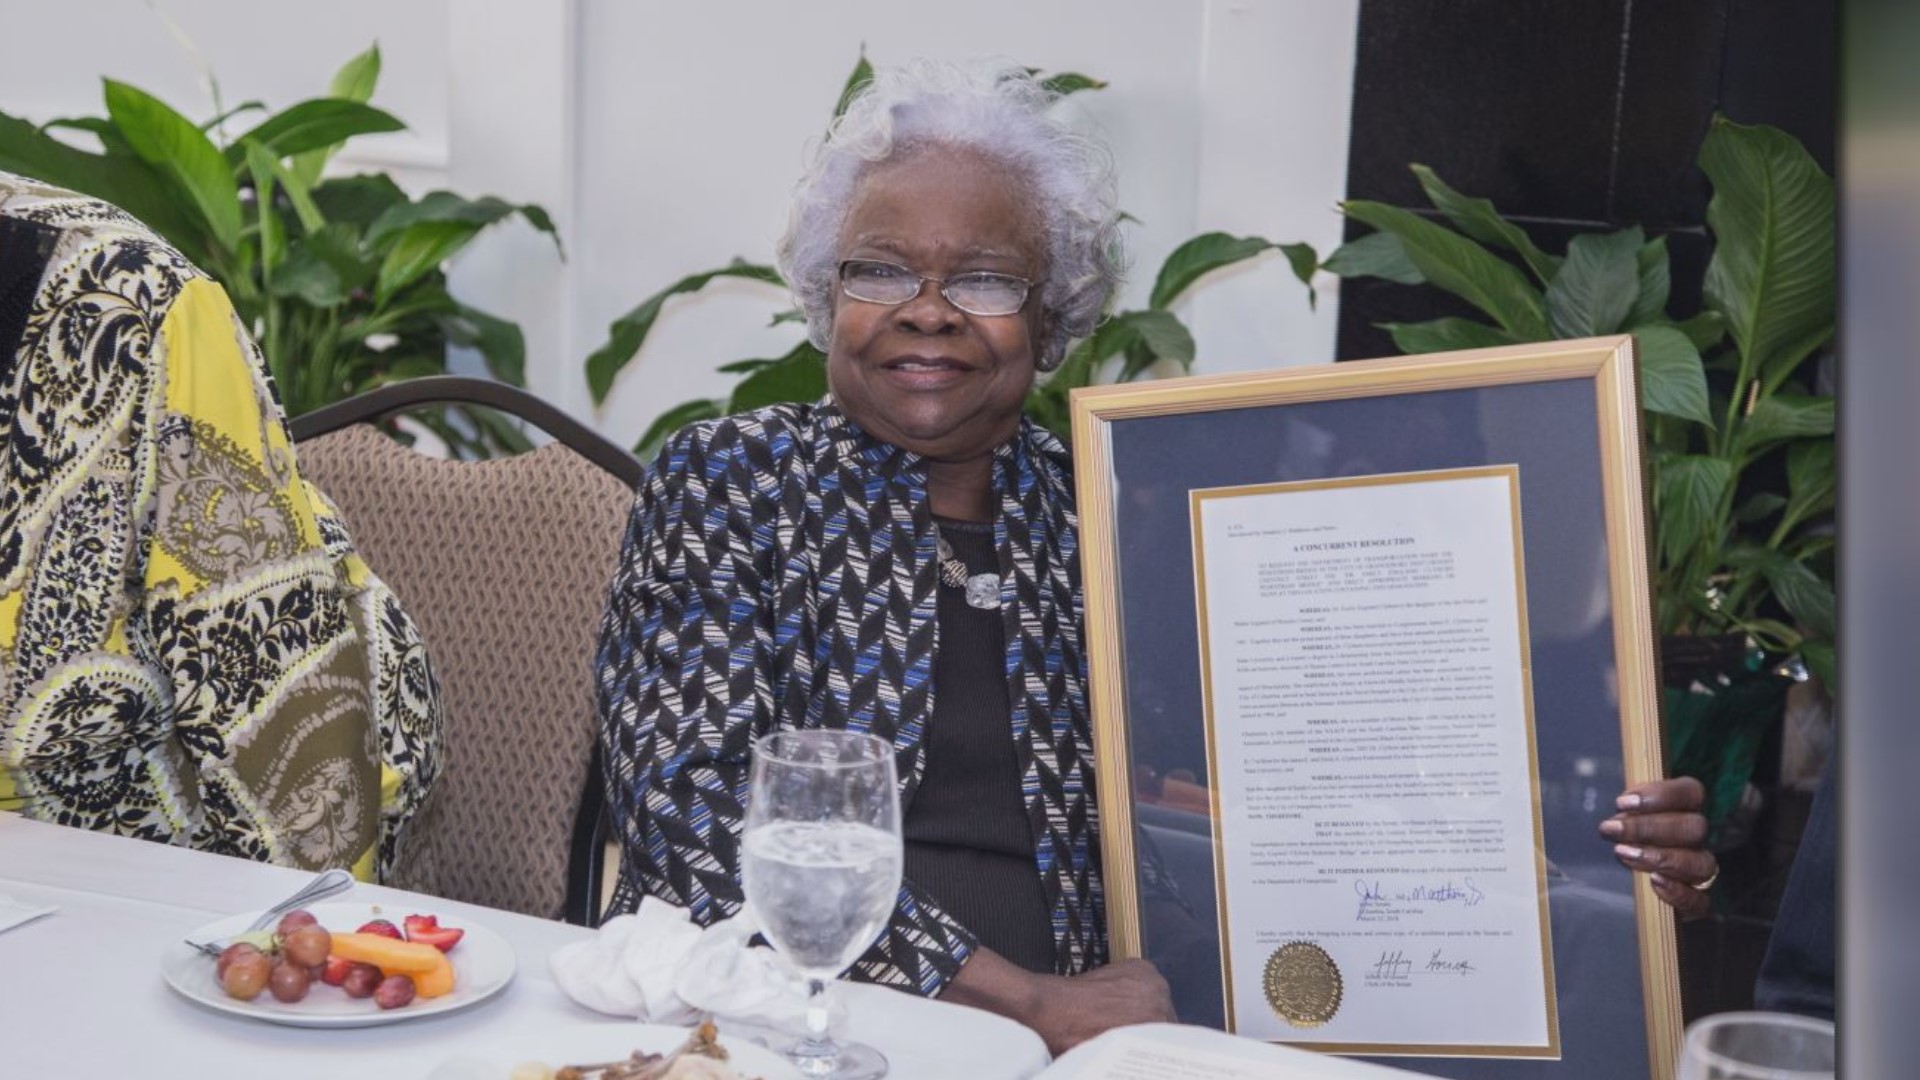 Dr. Emily Clyburn, a philanthropist, librarian, and wife of Rep. James Clyburn, died at age 80.